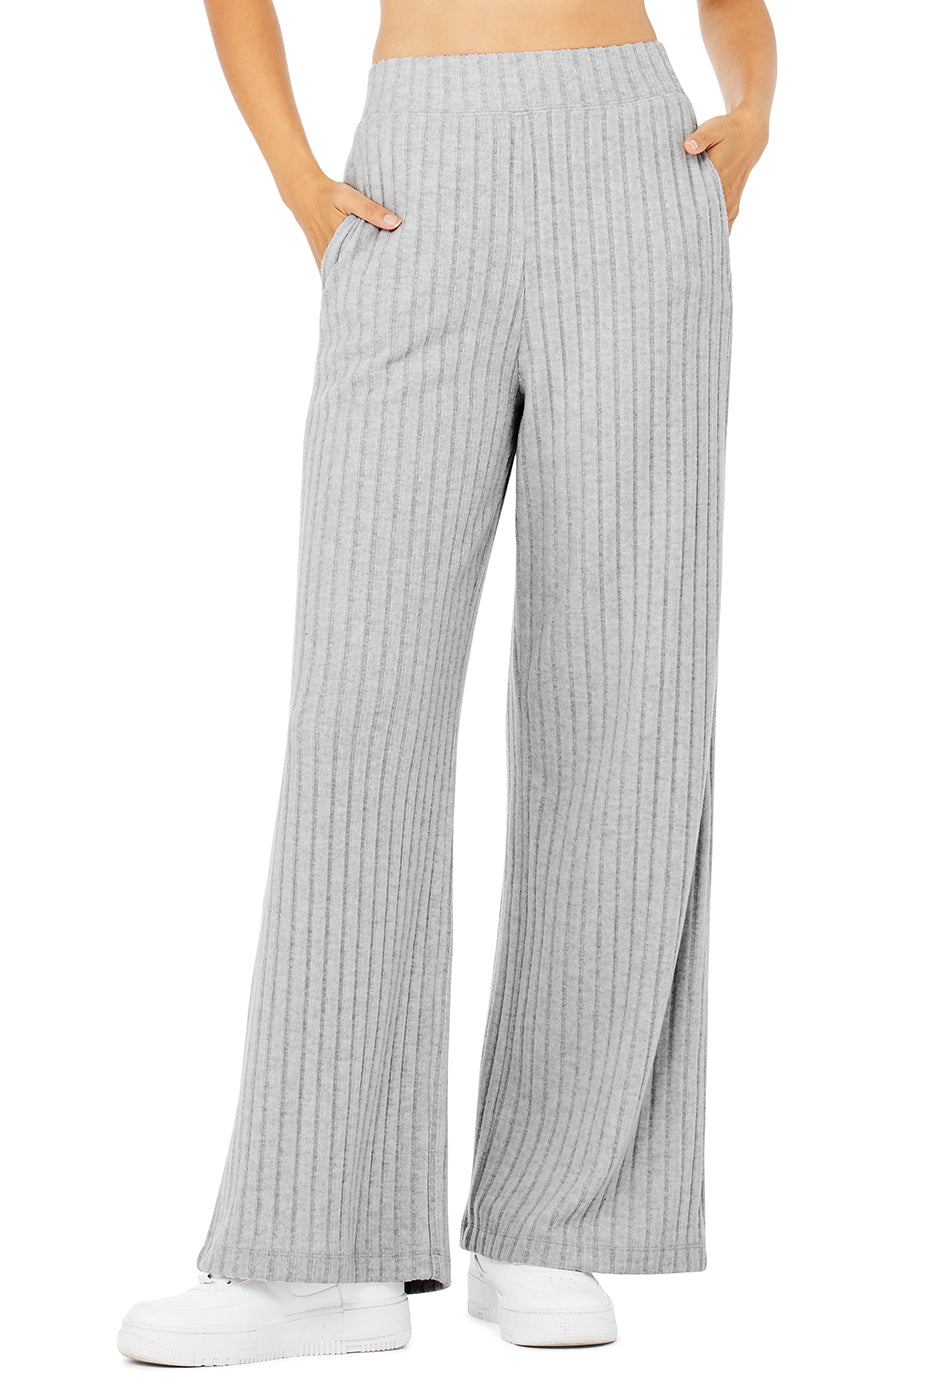 Ribbed Take Comfort Wide Leg Pants in Athletic Heather Grey by Alo Yoga